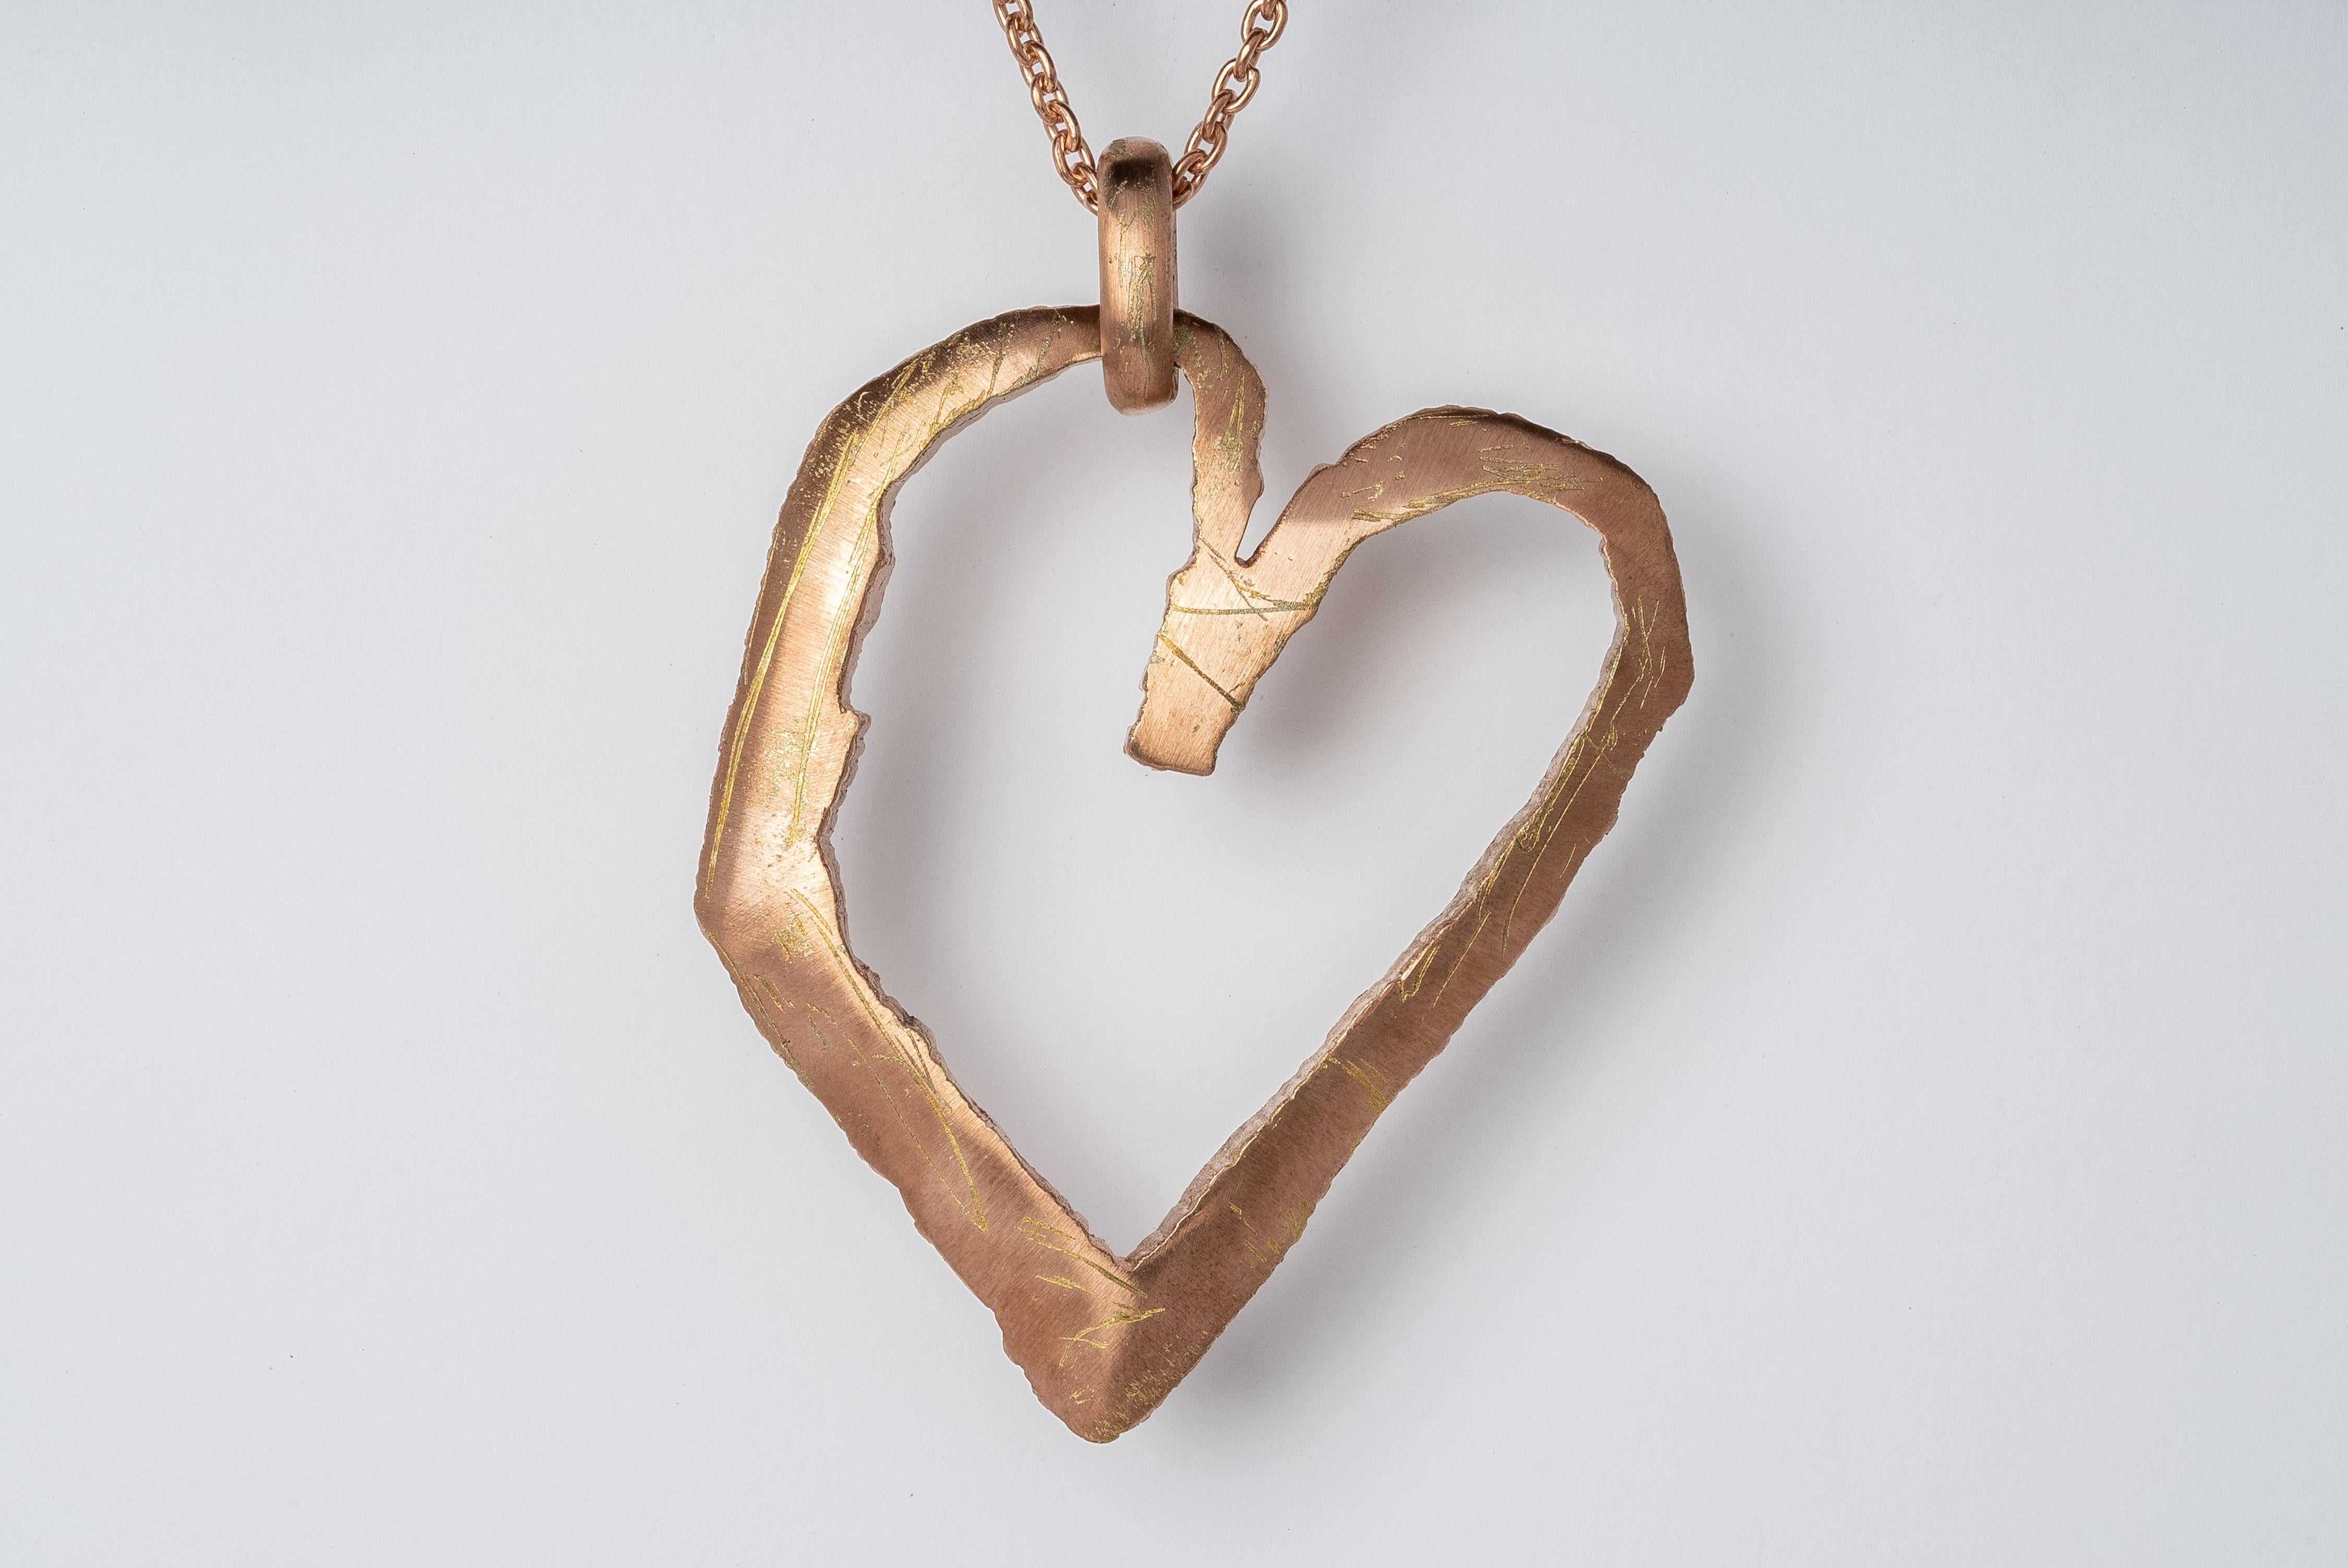 Jazz's Heart Necklace (Big, AM+AMA) In New Condition For Sale In Hong Kong, Hong Kong Island